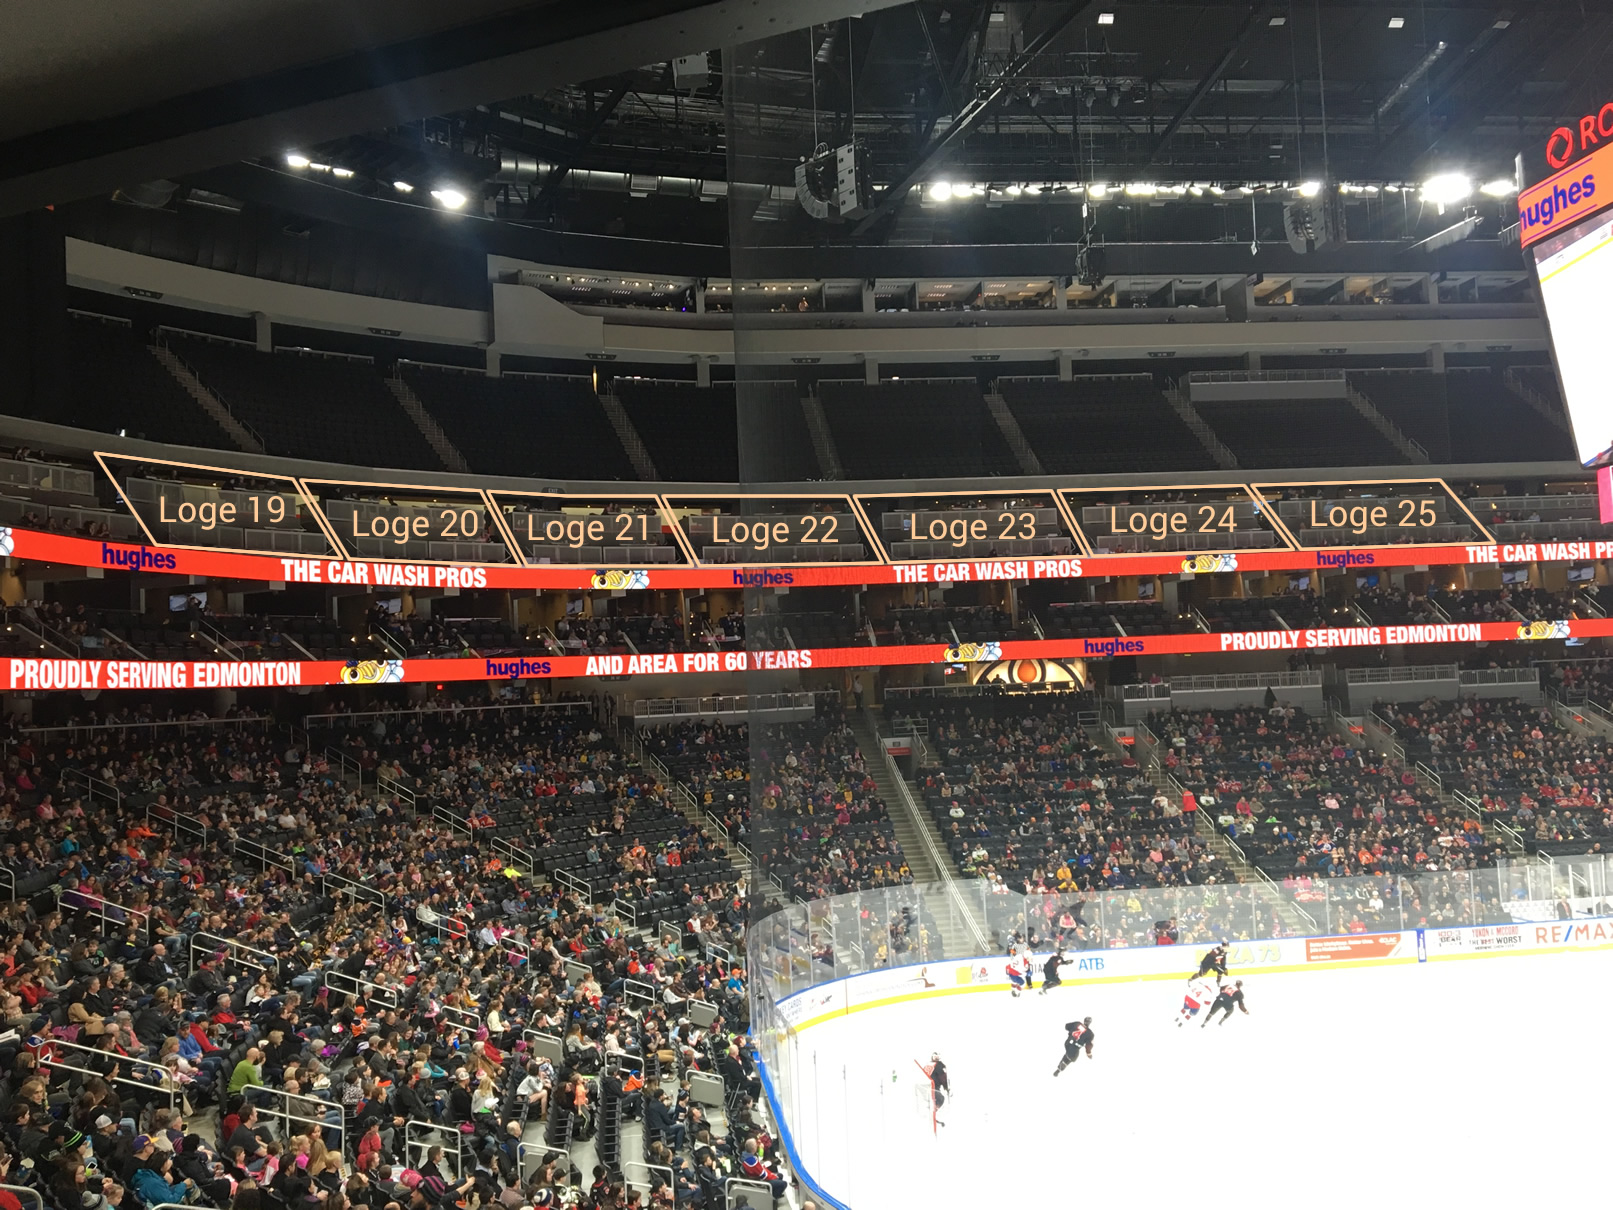 Loge Sections 19-25 at Rogers Place